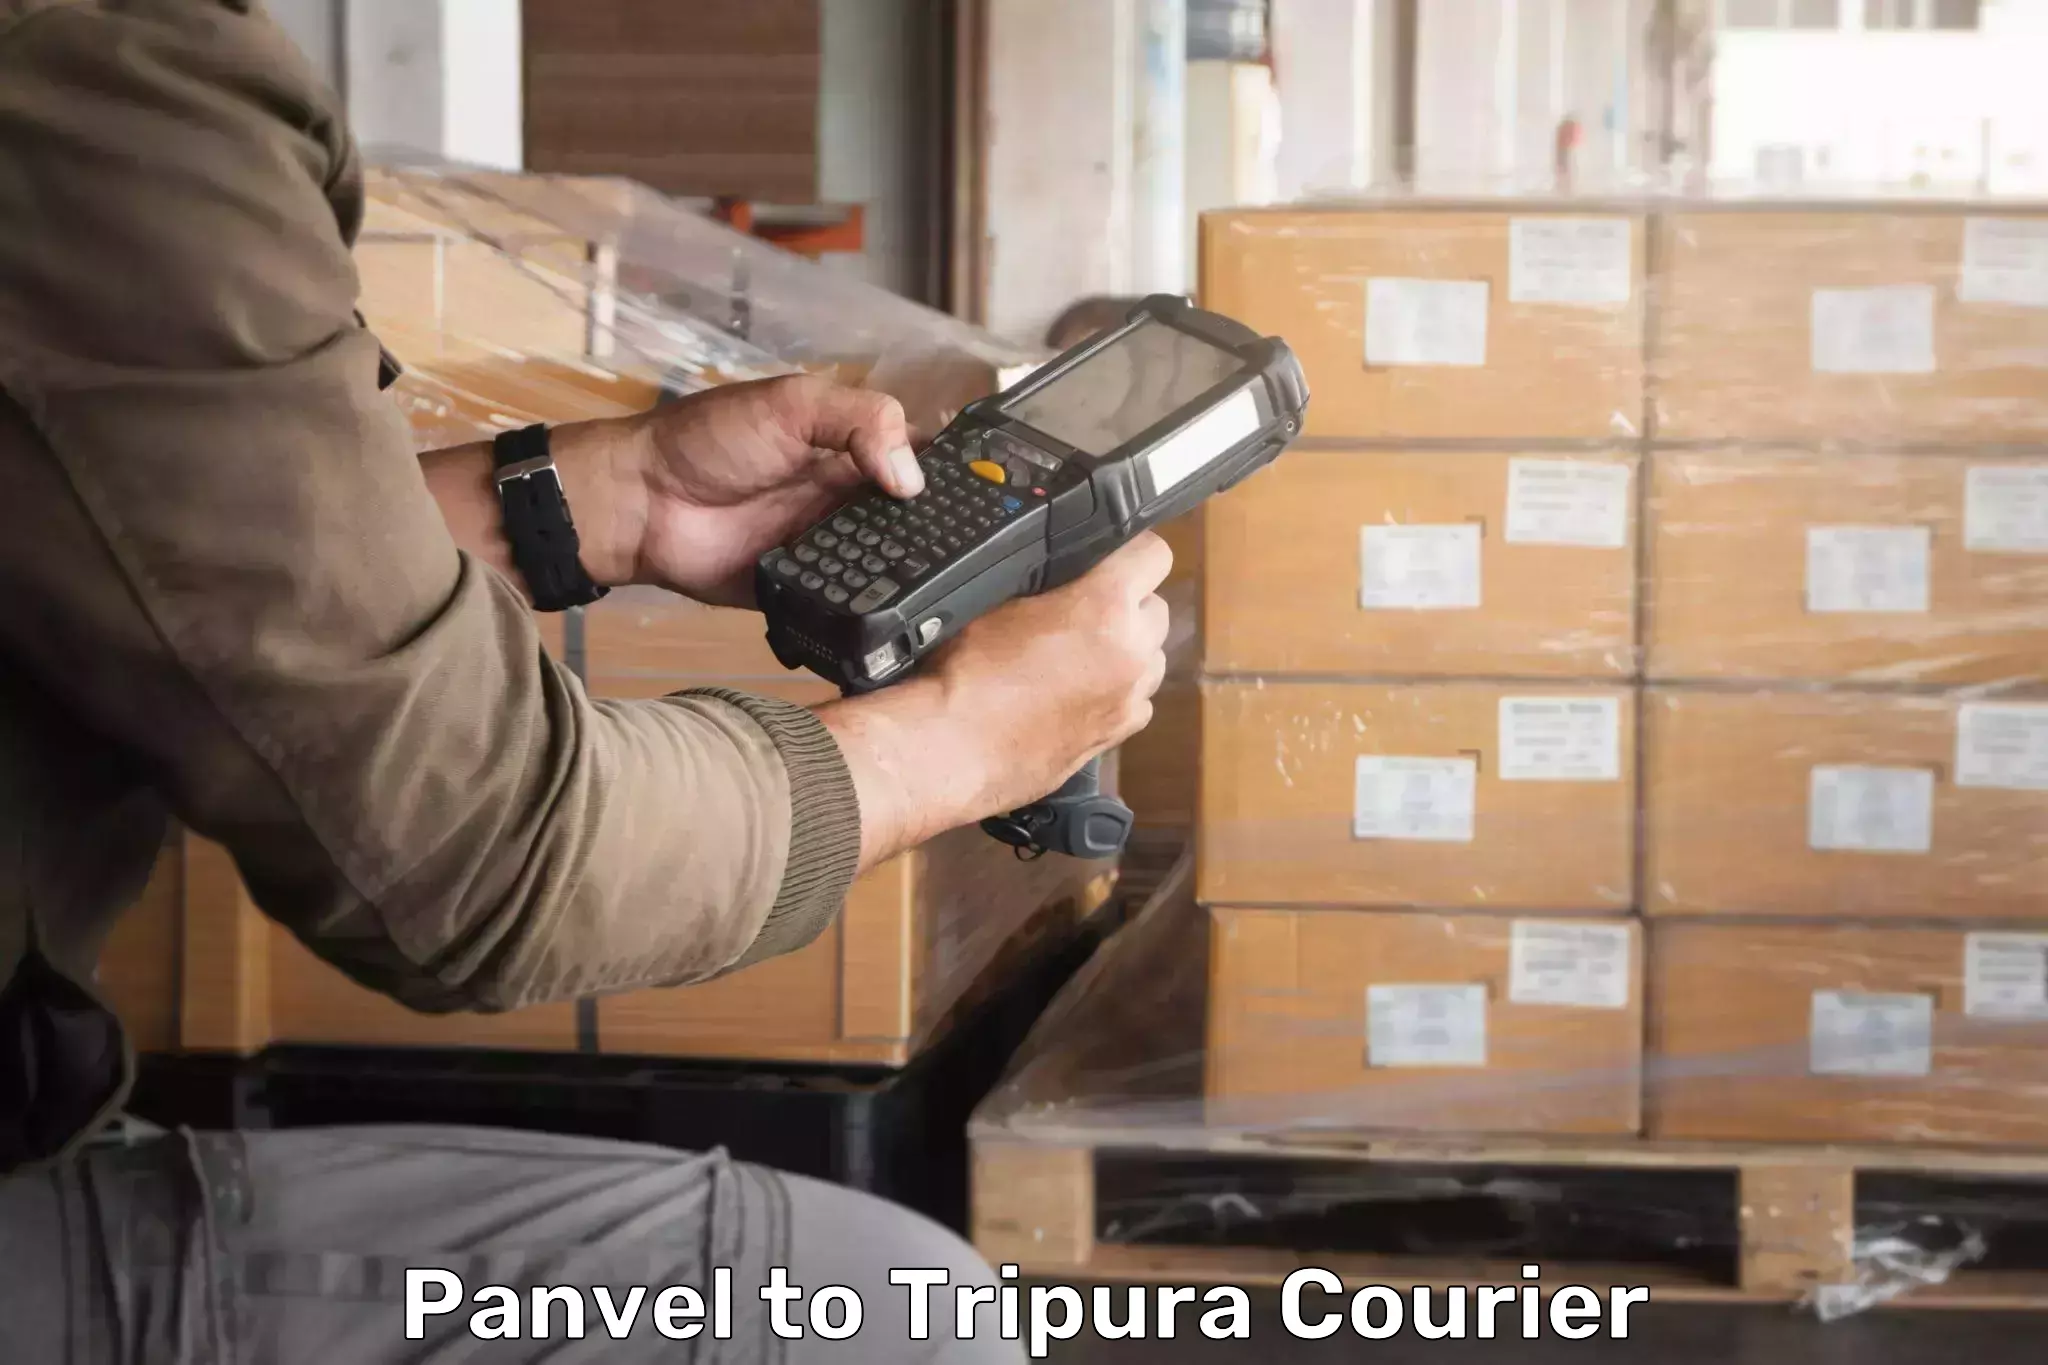 24/7 courier service Panvel to Tripura